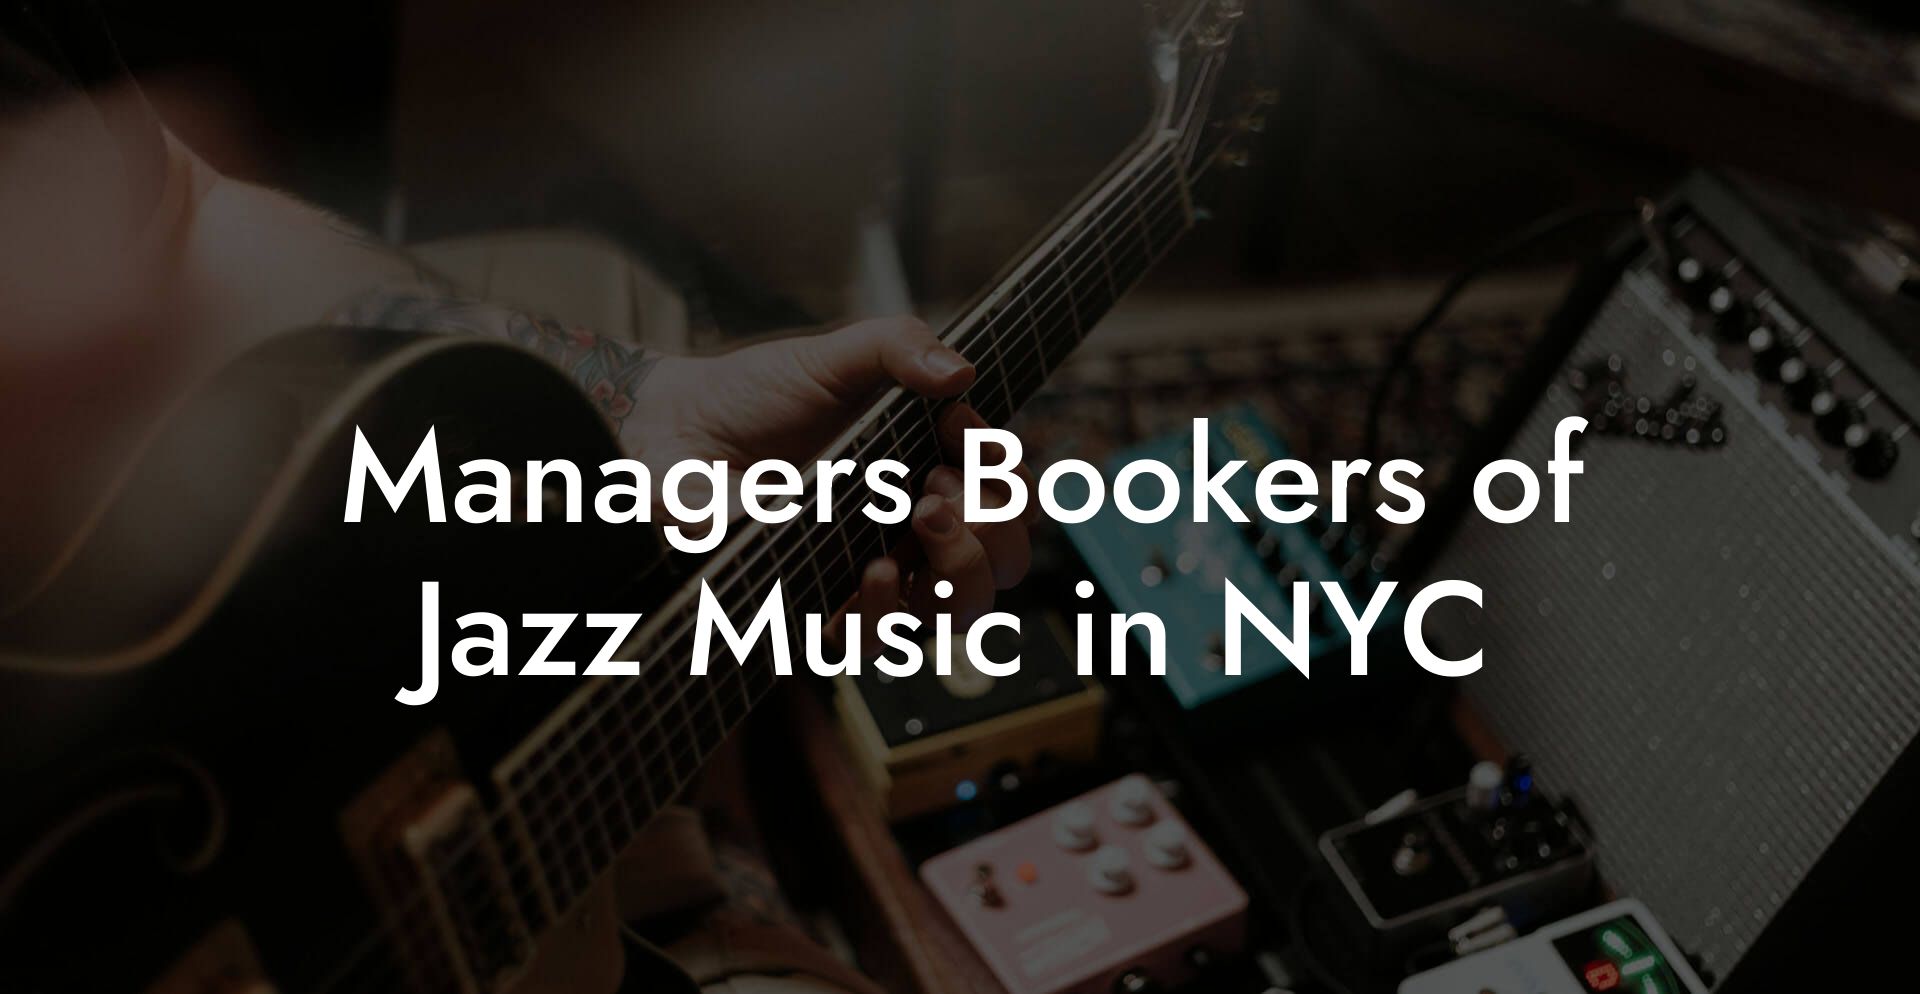 Managers Bookers of Jazz Music in NYC